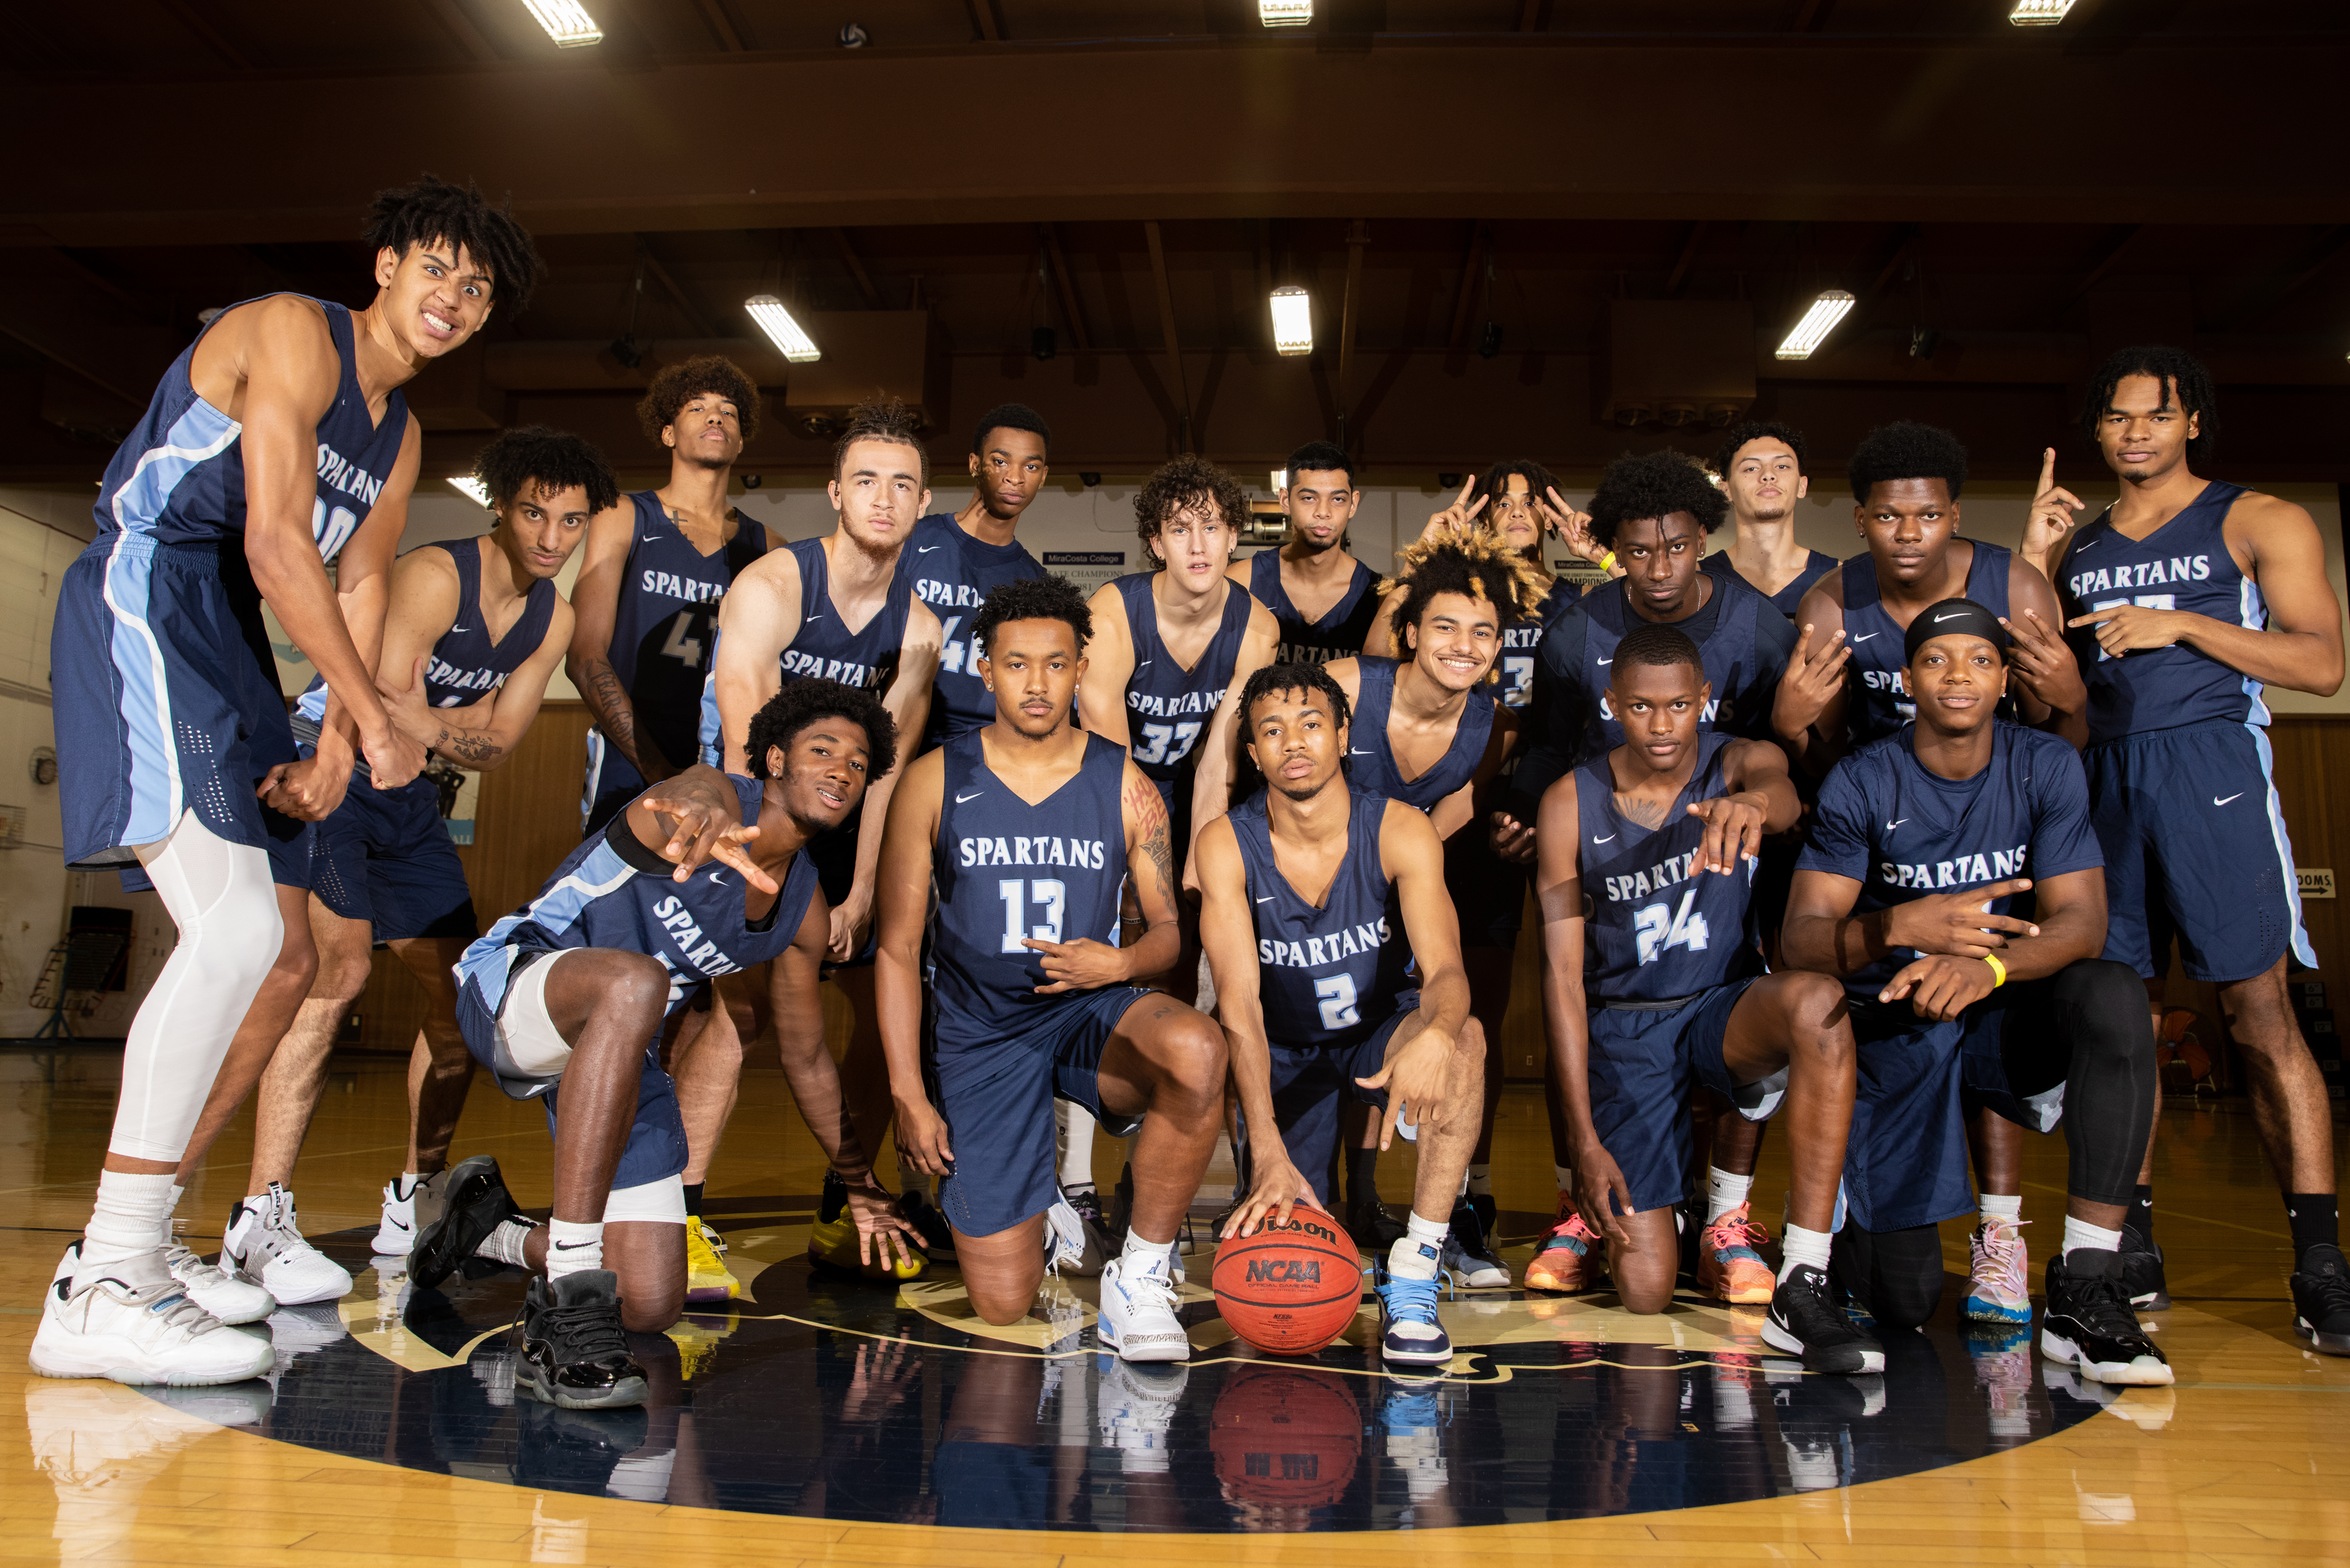 Men's basketball team picture, no coaches included in this version.